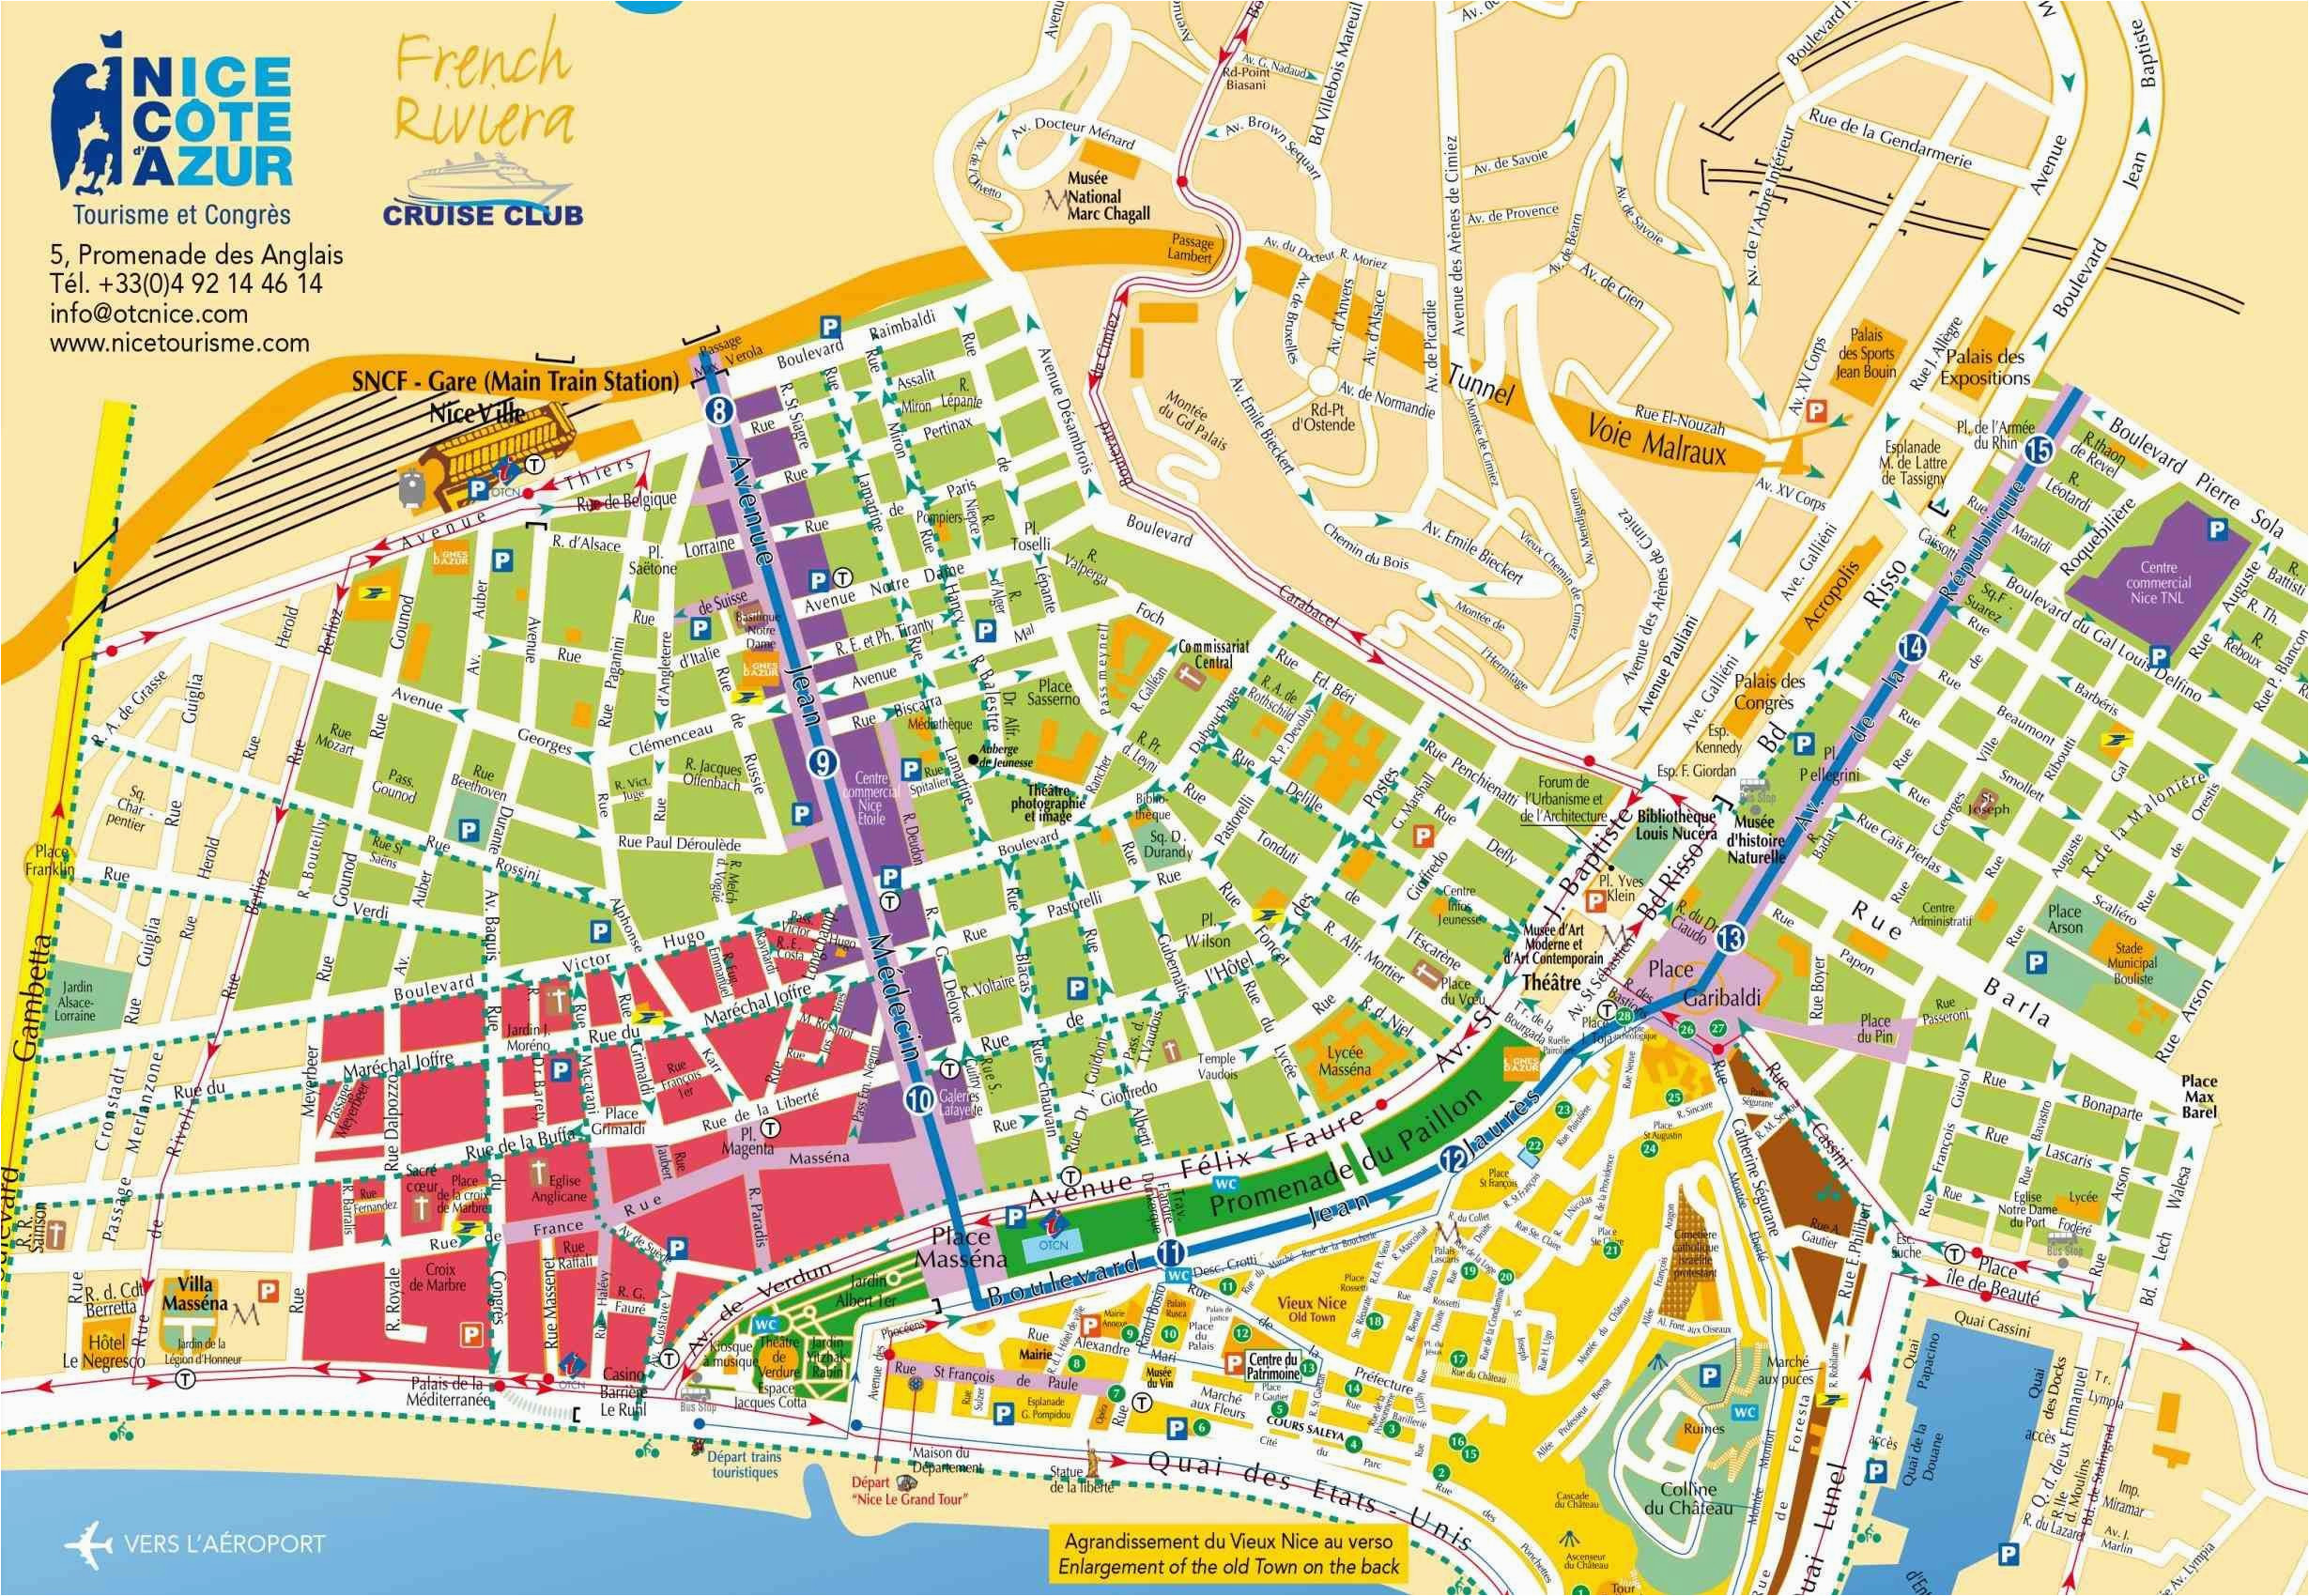 Map Of Cannes France Discover Map Of Nice France the top S Shortlisted for You by Locals